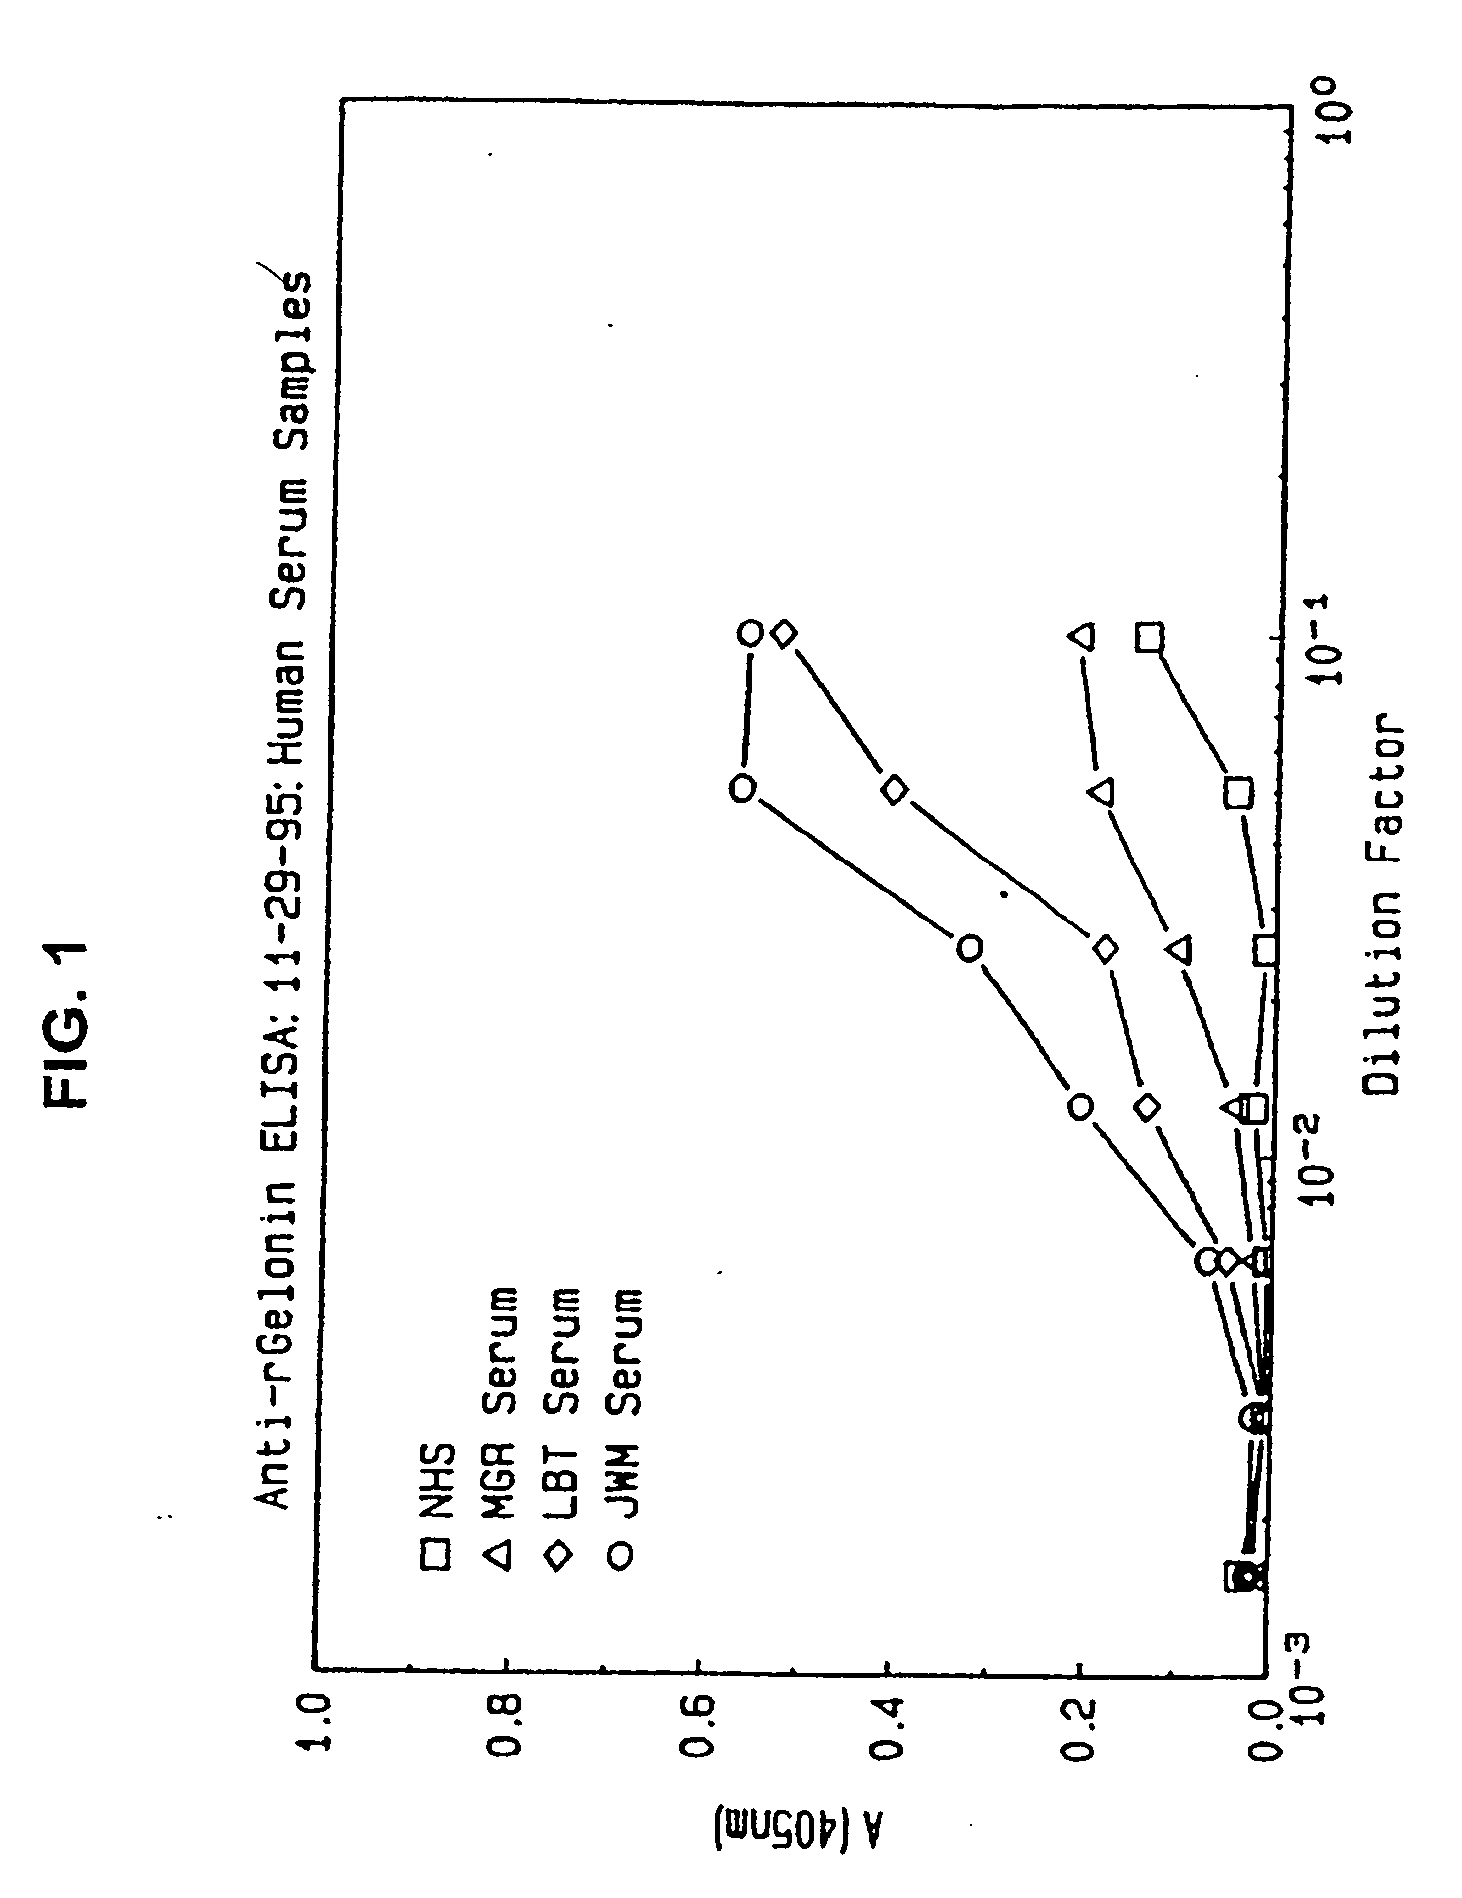 Modified proteins, designer toxins, and methods of making thereof